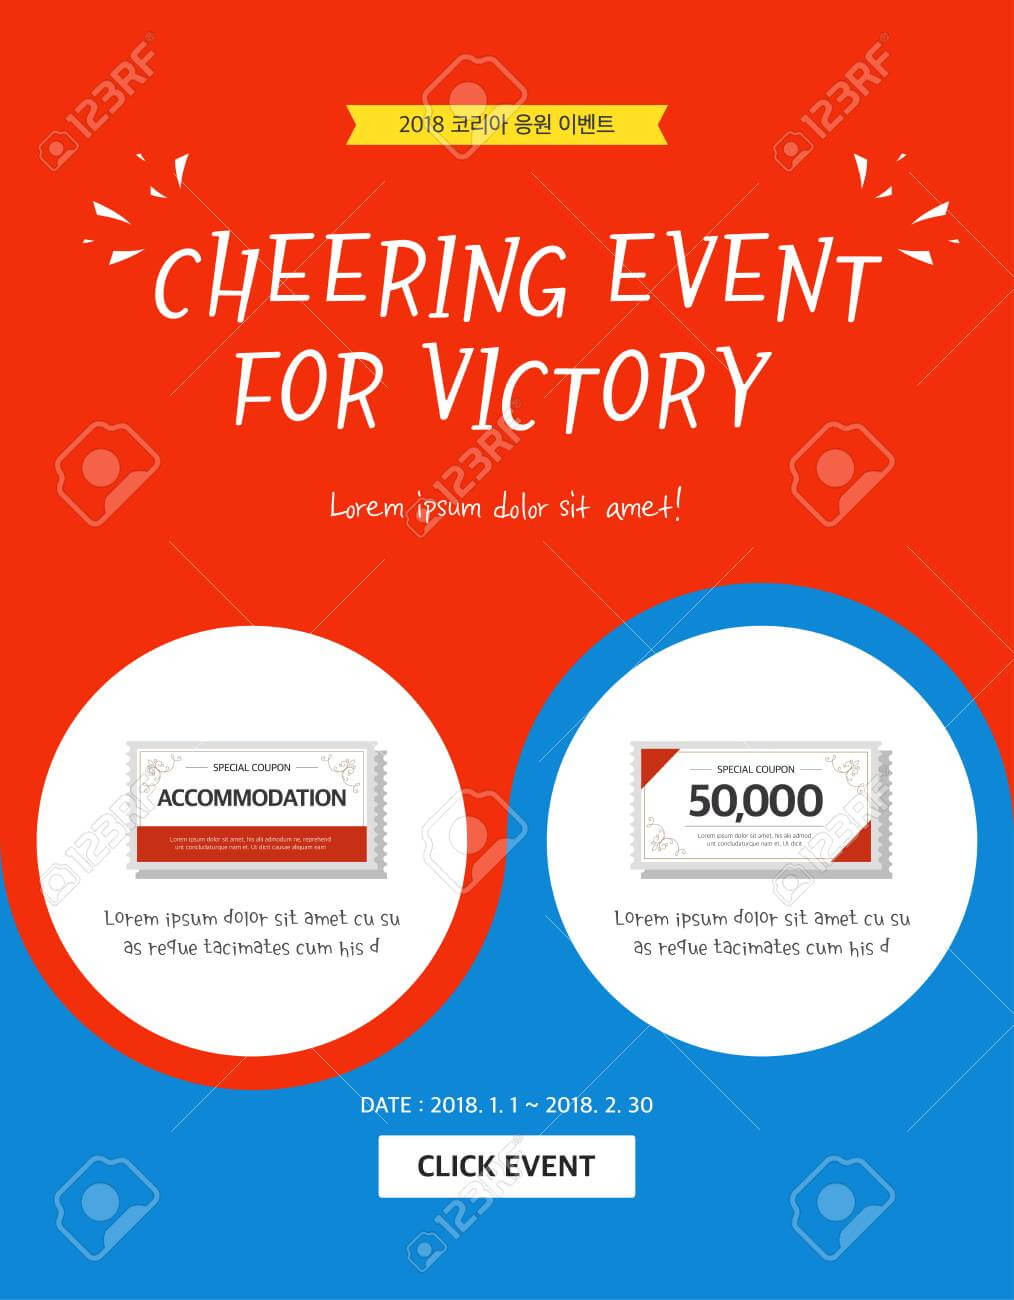 Event Banner Template – Cheering Event For Victory For Event Banner Template